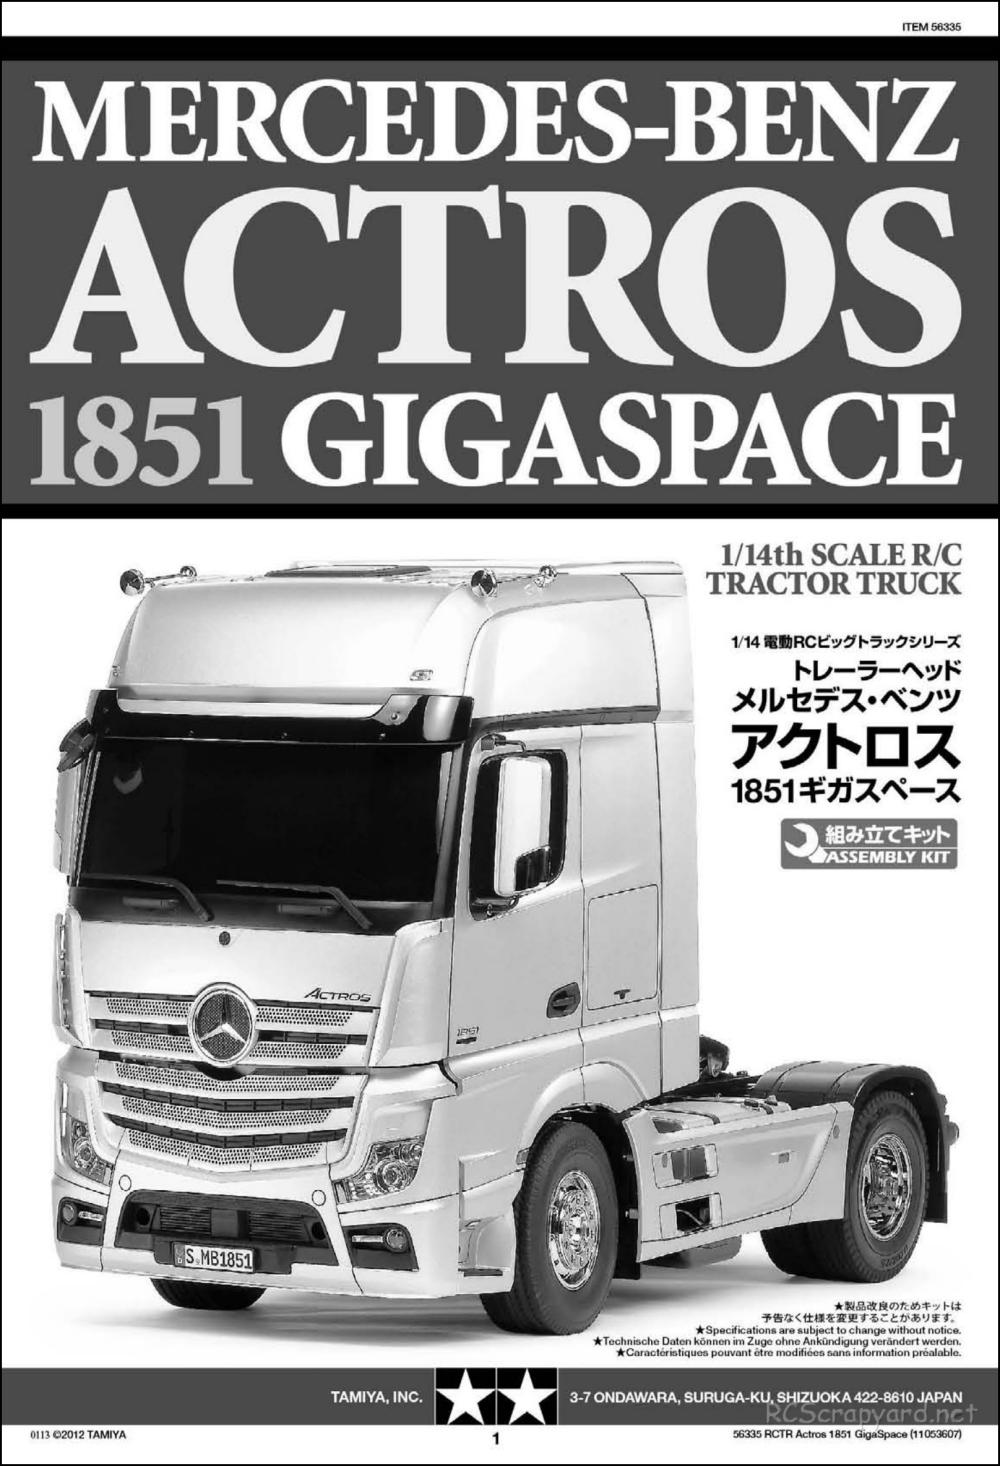 Tamiya - Mercedes-Benz Actros 1851 Gigaspace Tractor Truck Chassis - Manual - Page 1